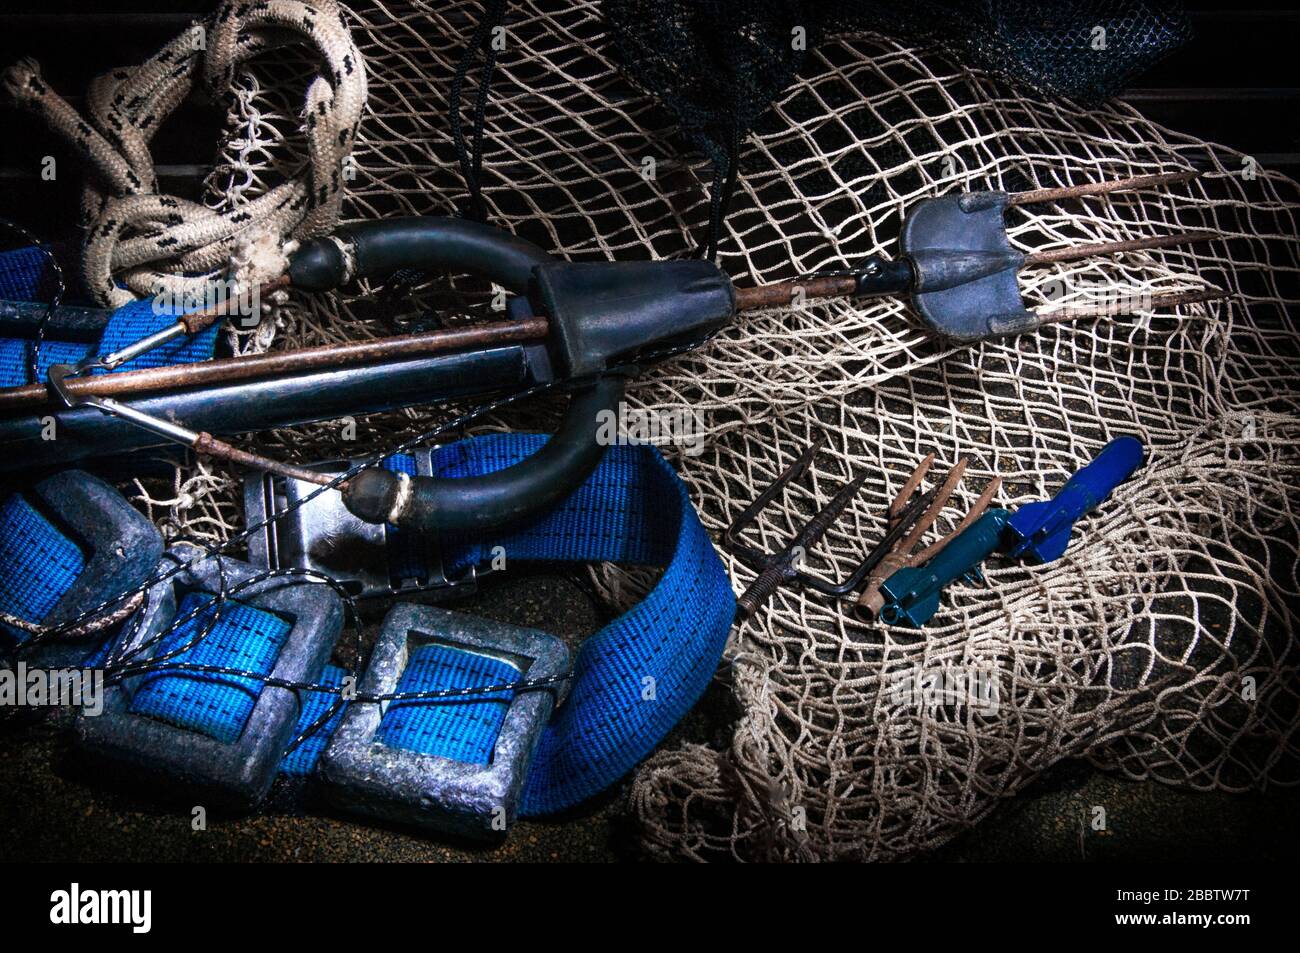 https://c8.alamy.com/comp/2BBTW7T/details-of-scuba-diving-and-spear-fishing-gear-over-a-old-fishing-net-2BBTW7T.jpg